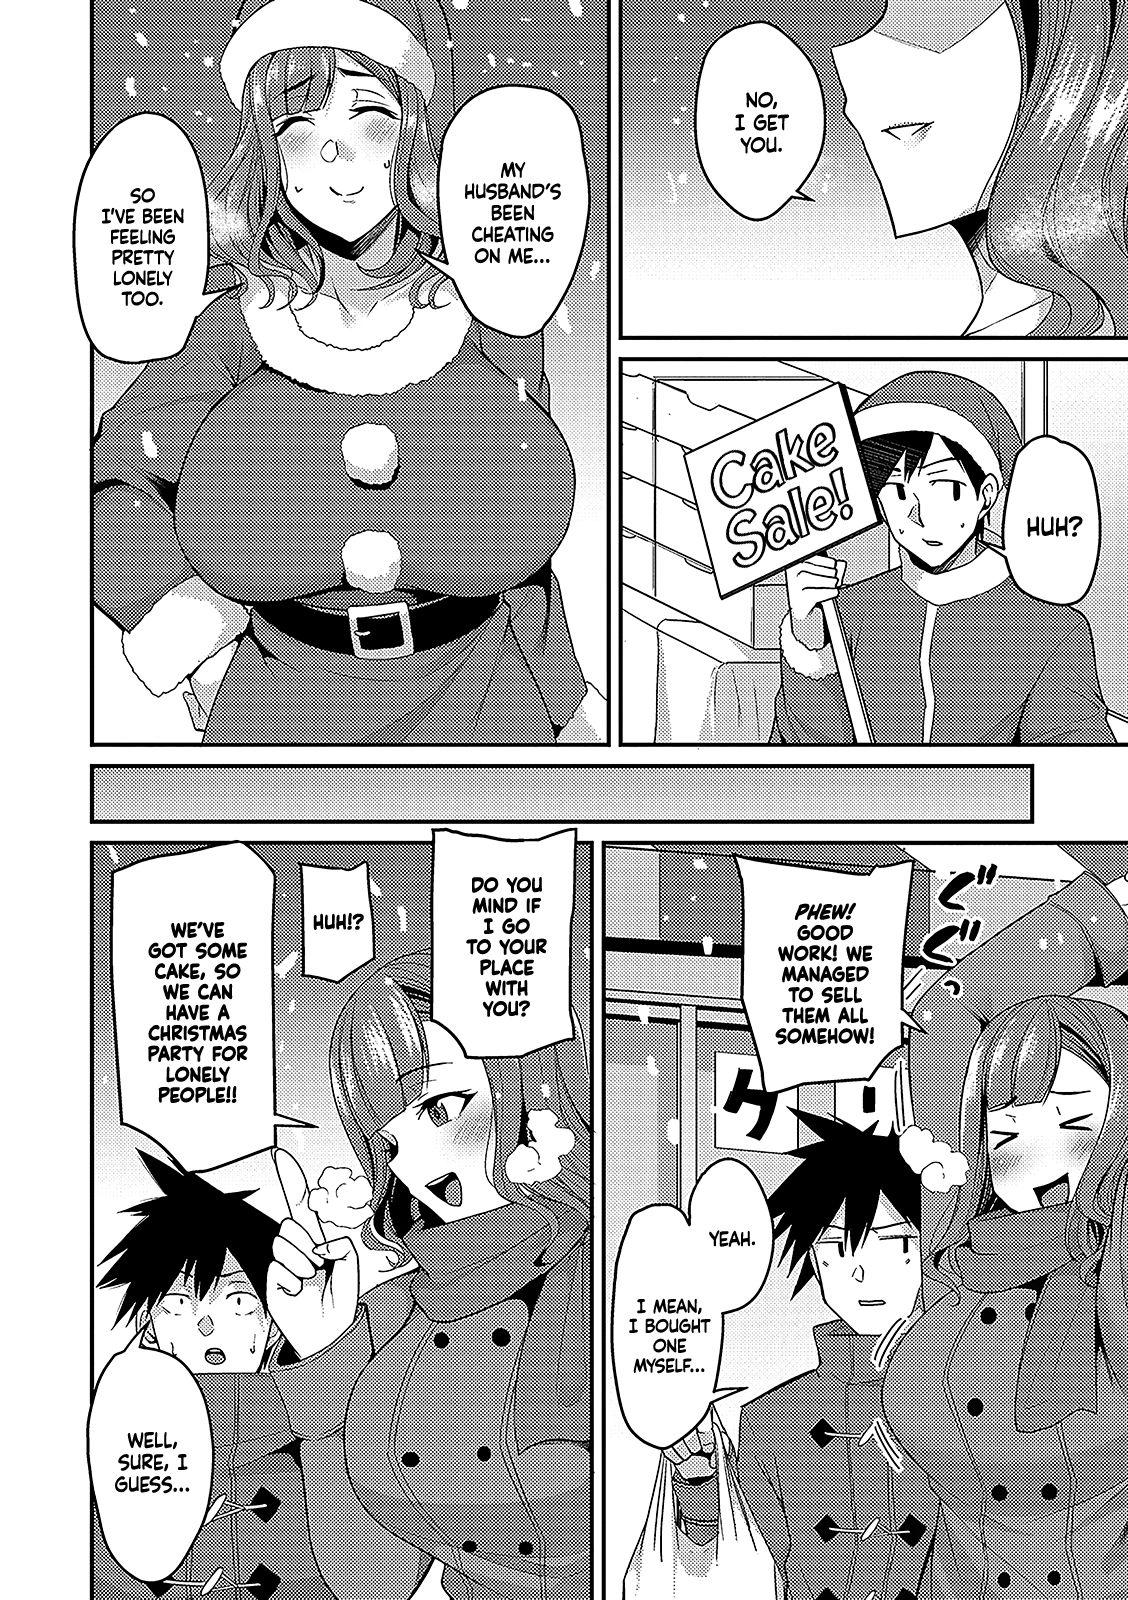 Best Blowjobs Ever Hitozuma to Christmas | Christmas With A Married Woman Unshaved - Page 2